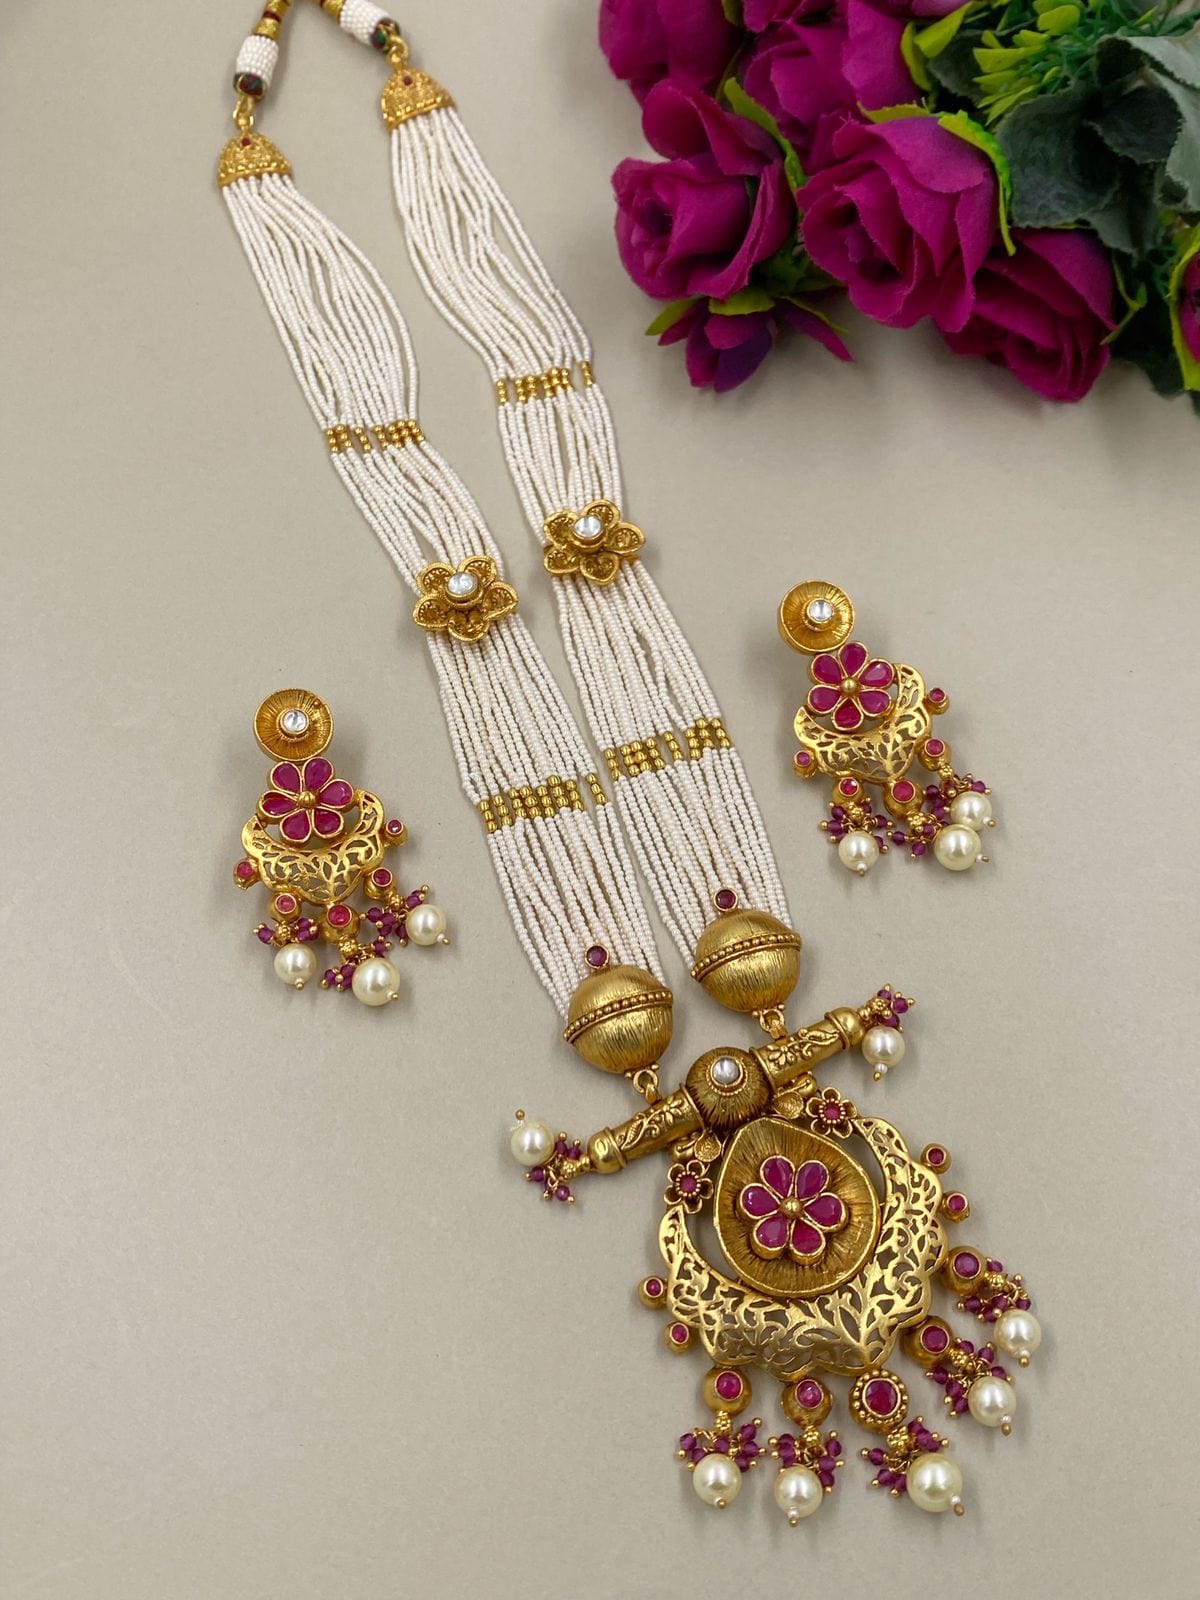 Traditional Long Golden Pendant And Pearls Necklace For Women Antique Golden Necklace Sets